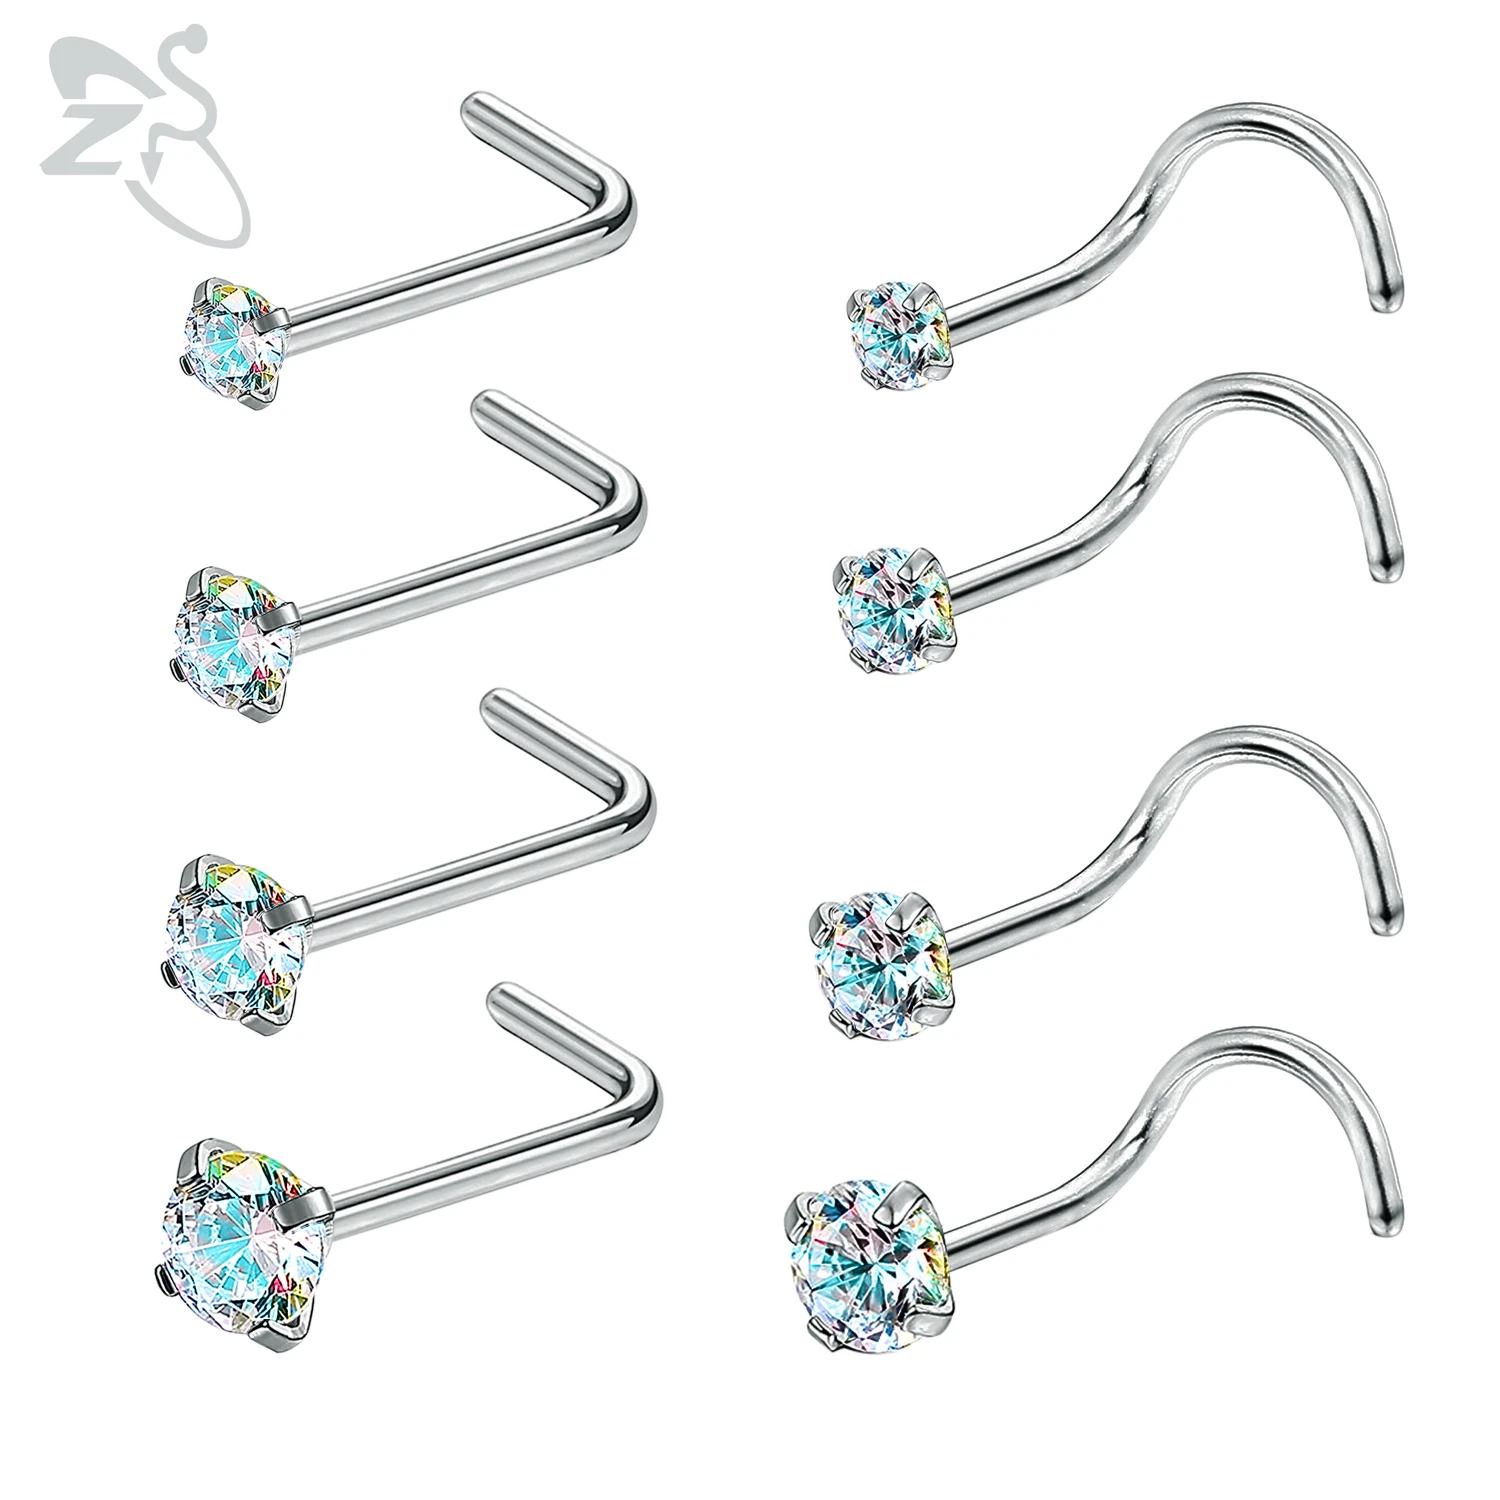 

ZS 8 Pcs/lot 20g 316L Surgical Steel Nose Studs Screw&L Shape AAA CZ Crystal Nose Piercings 4 Size Round Zircon Nostril Piercing